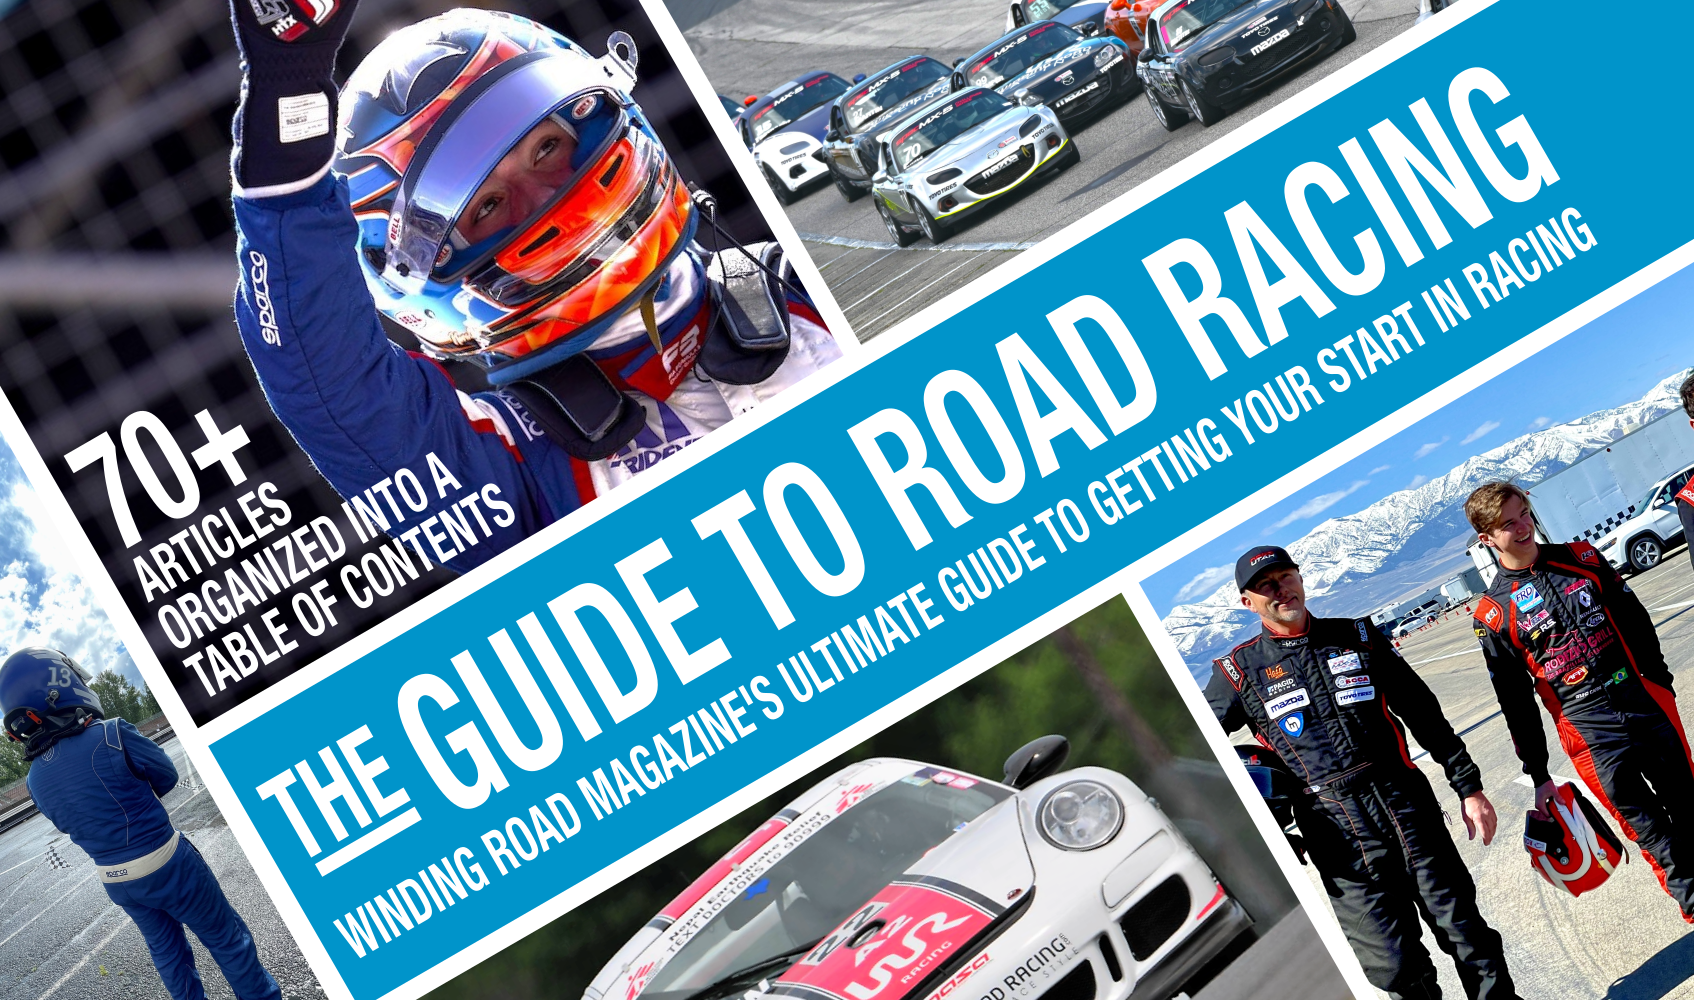 The Guide to Road Racing &#8211; Table of Contents, Winding Road Magazine